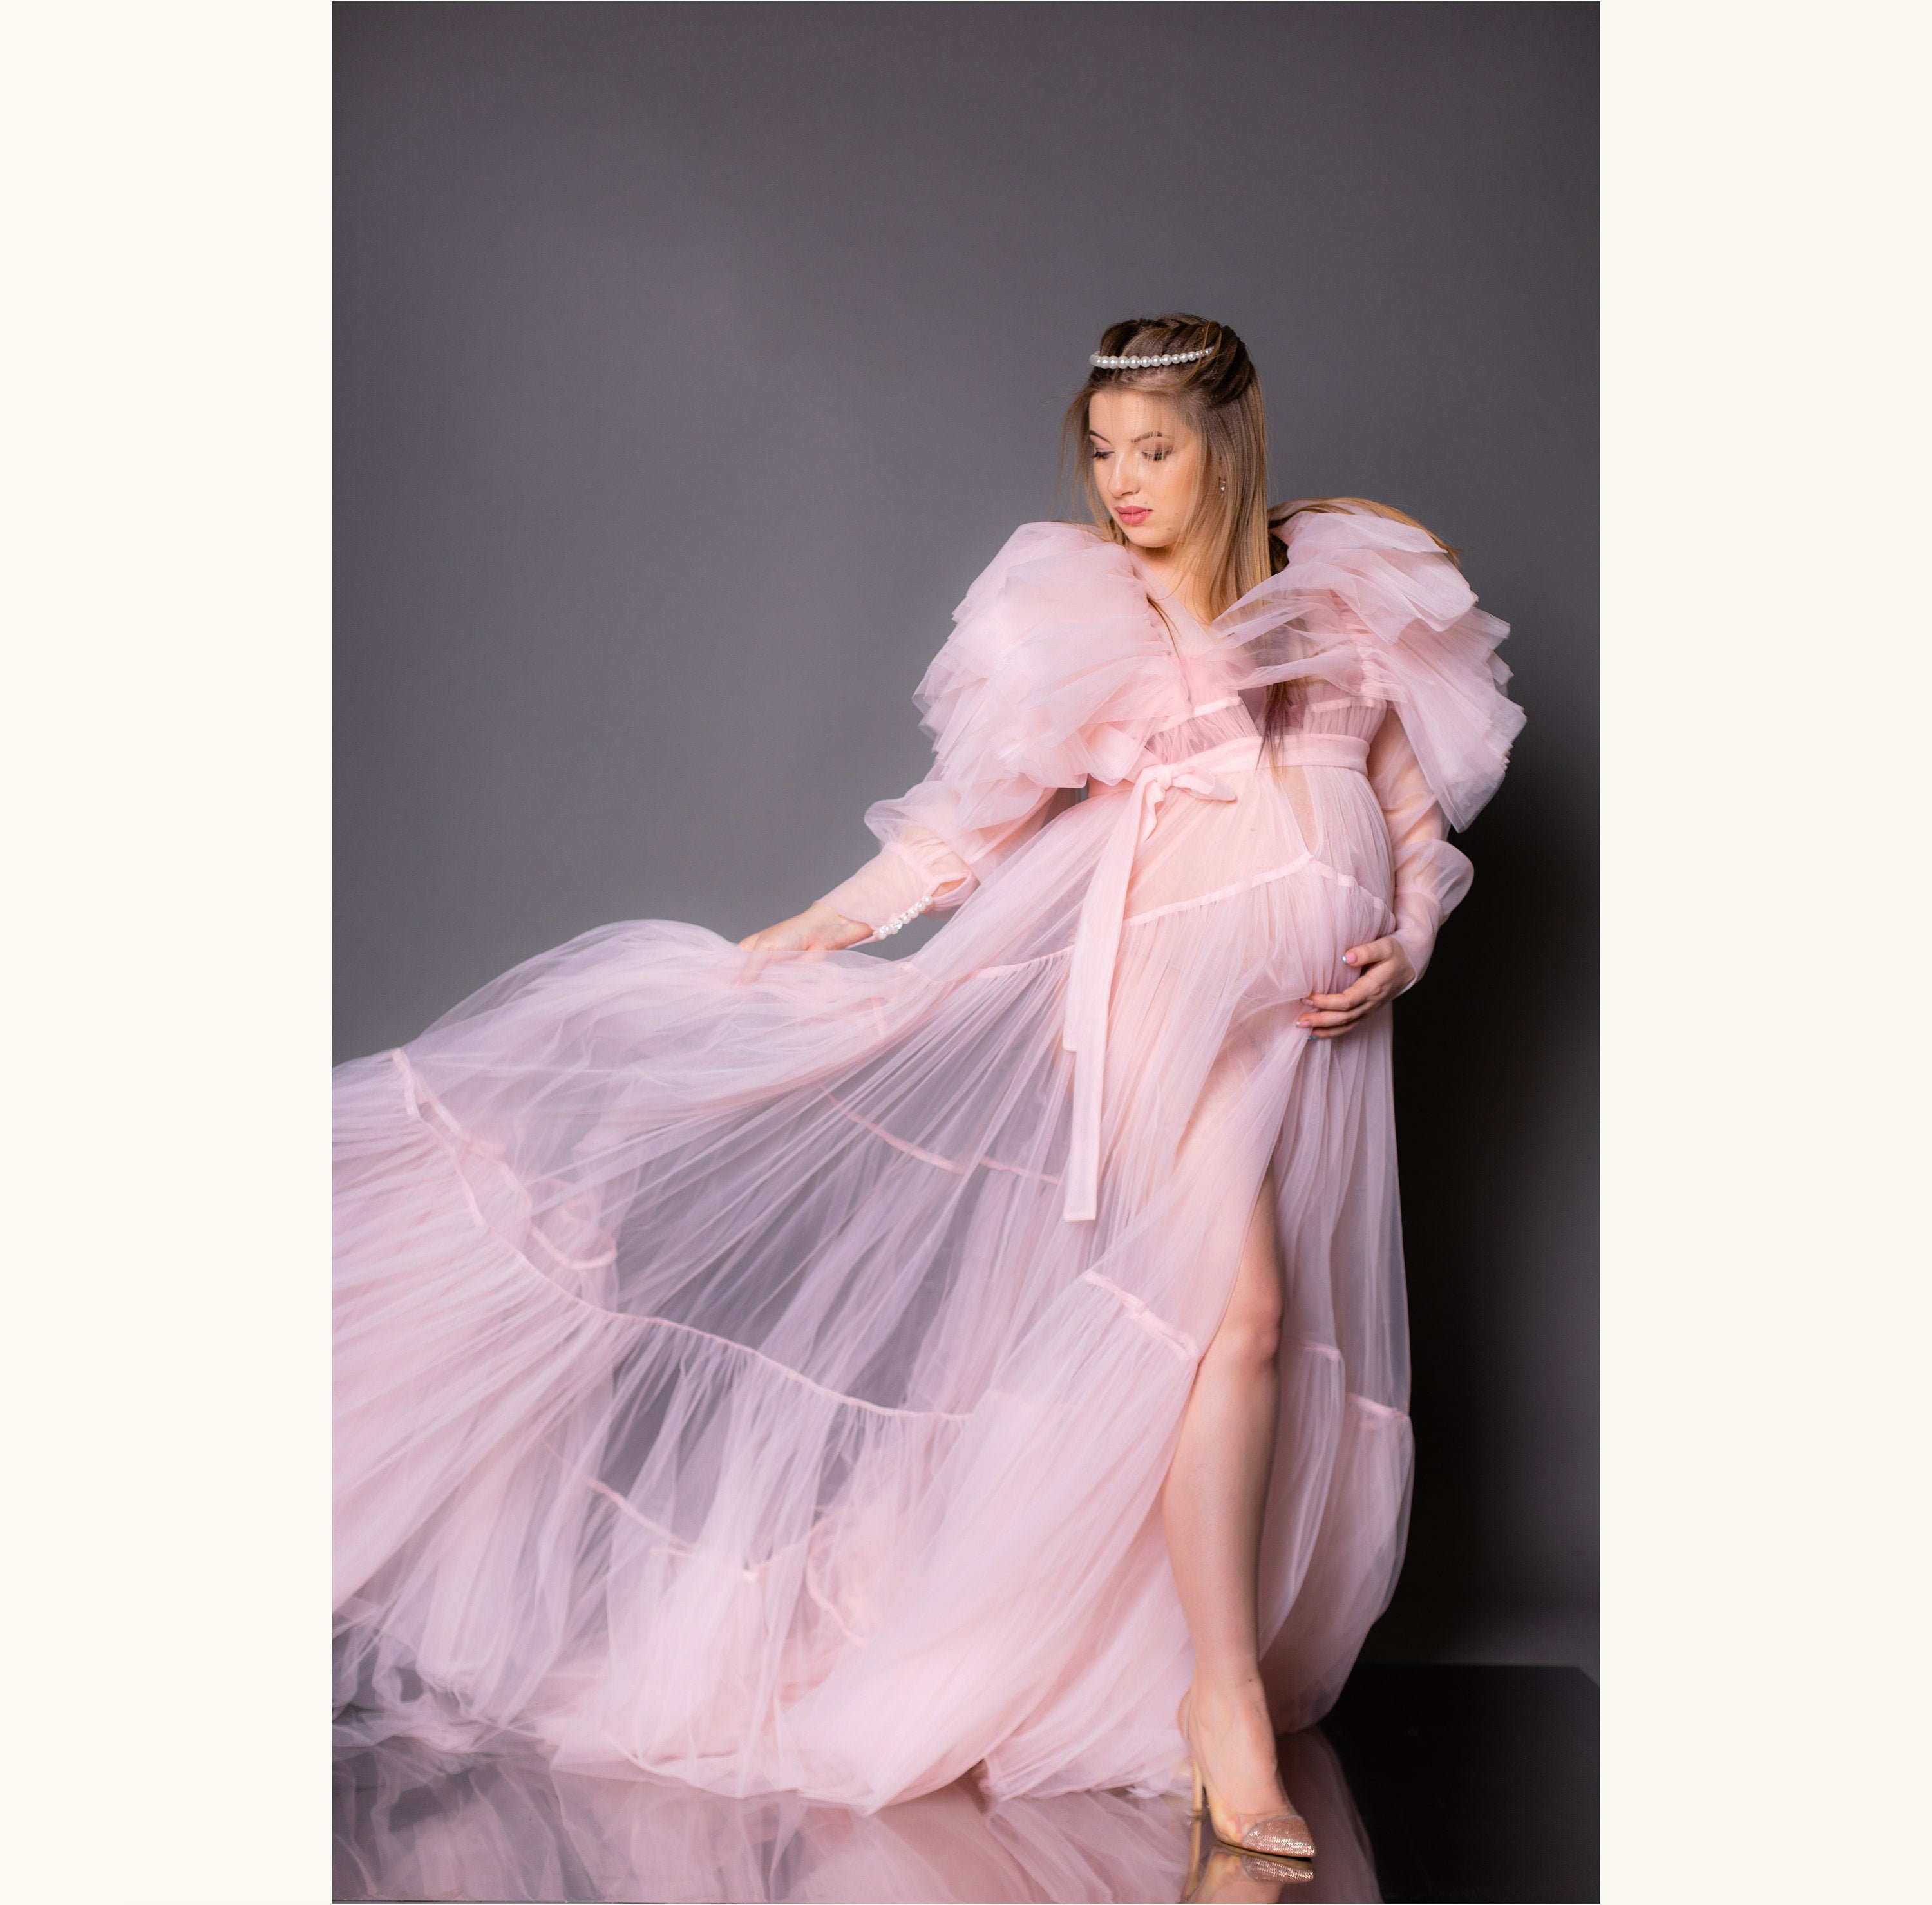 Matchinglook Pink Maternity Robe, Frilled Maternity Gown, Pink Tulle Robe, Maternity Photoshoot Robe, Boudoir Tulle Dress, Sheer Ruffle Gown Robe Hot Pink / One